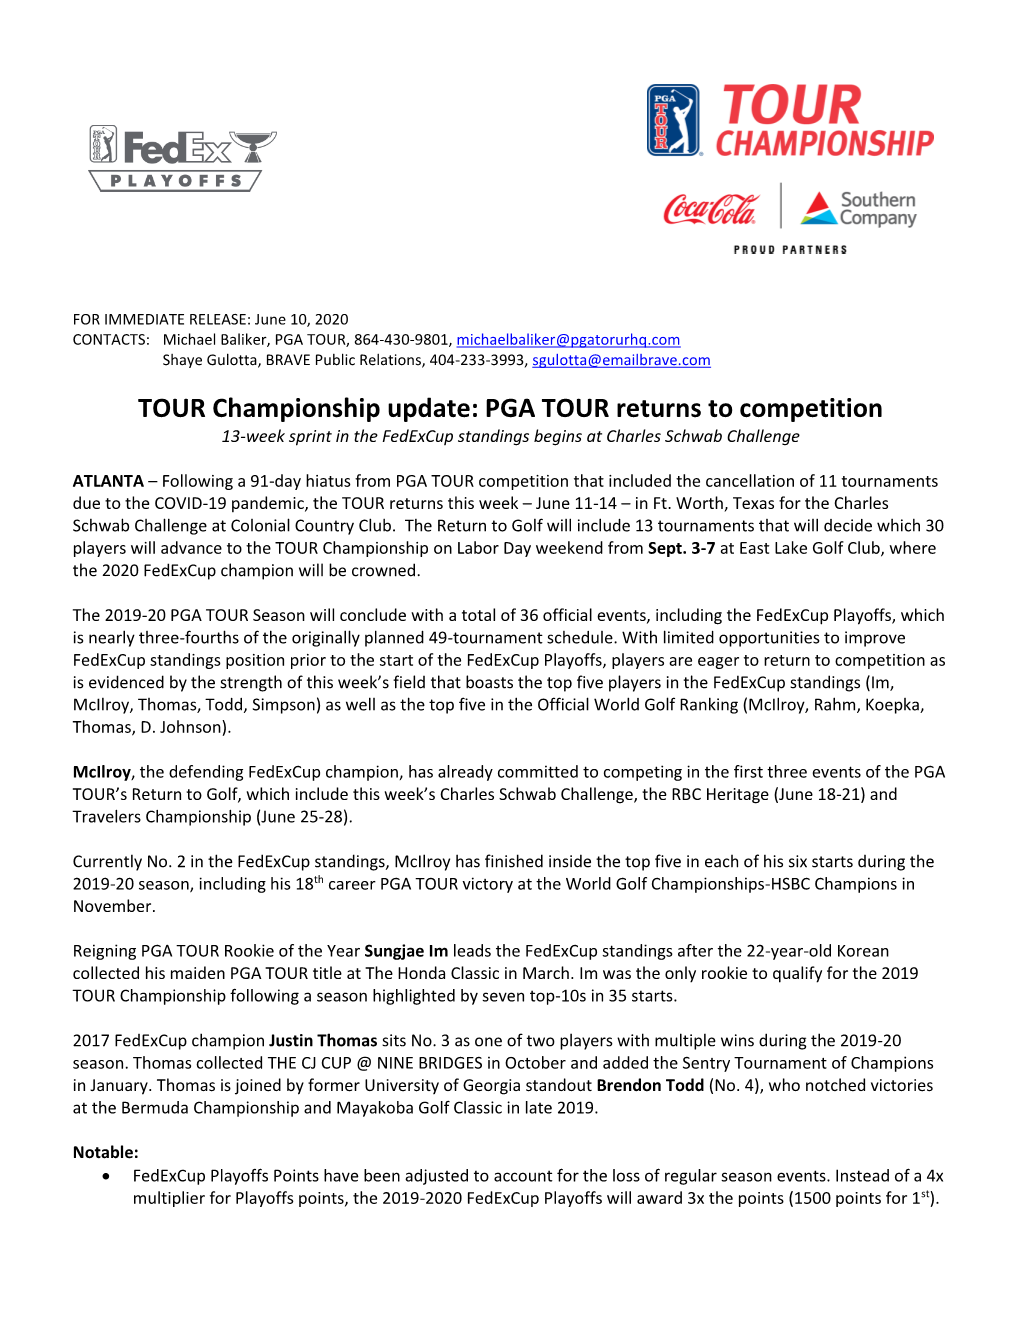 TOUR Championship Update: PGA TOUR Returns to Competition 13-Week Sprint in the Fedexcup Standings Begins at Charles Schwab Challenge